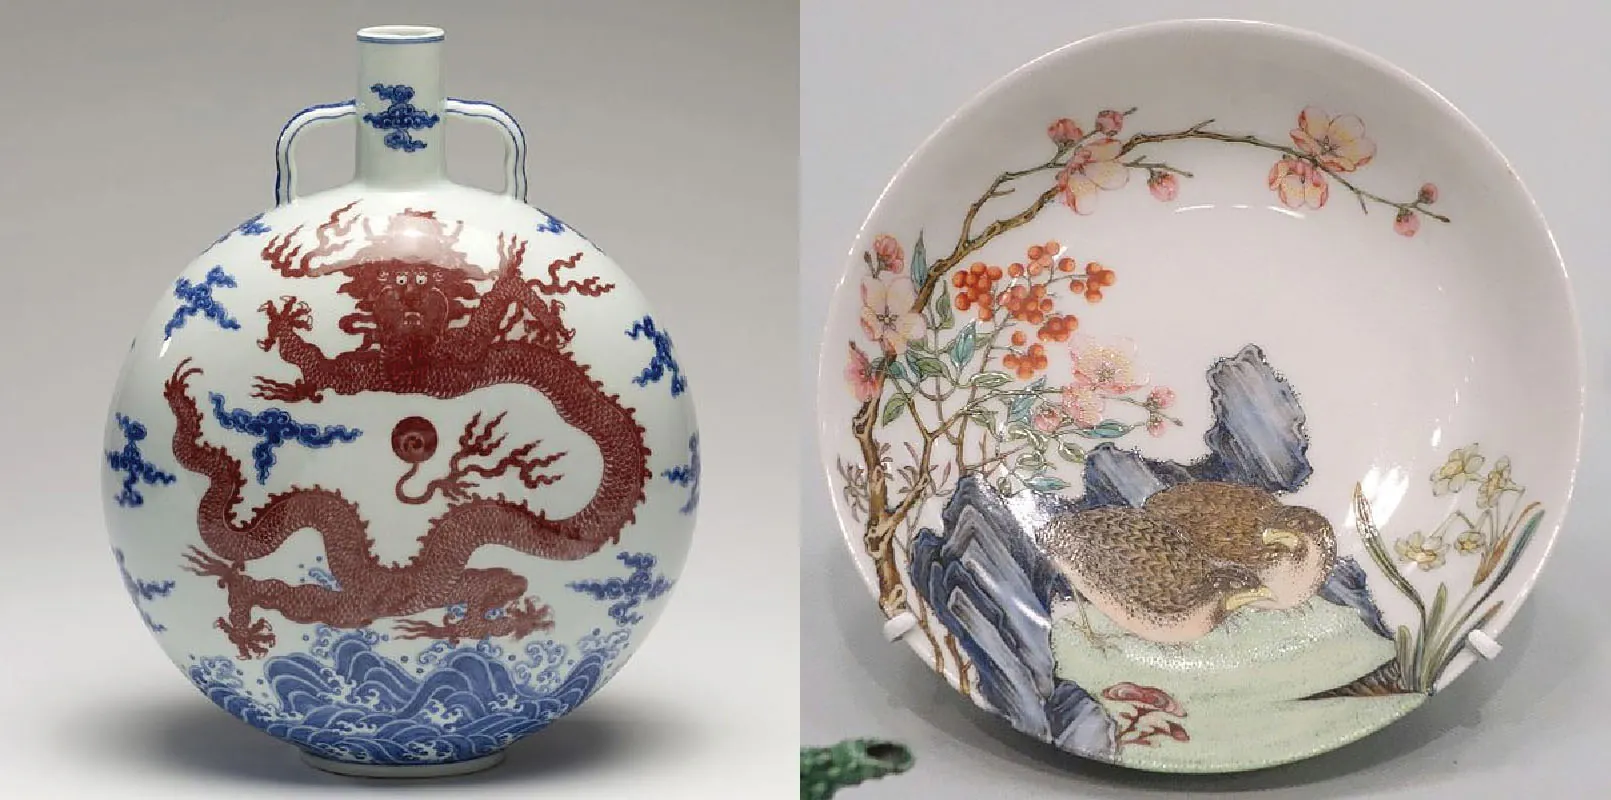 There are two images. The image on the left is of a round porcelain flask decorated with a picture of a dragon. The image on the right is a porcelain saucer decorated with a picture of a bird surrounded by flowers and grass.